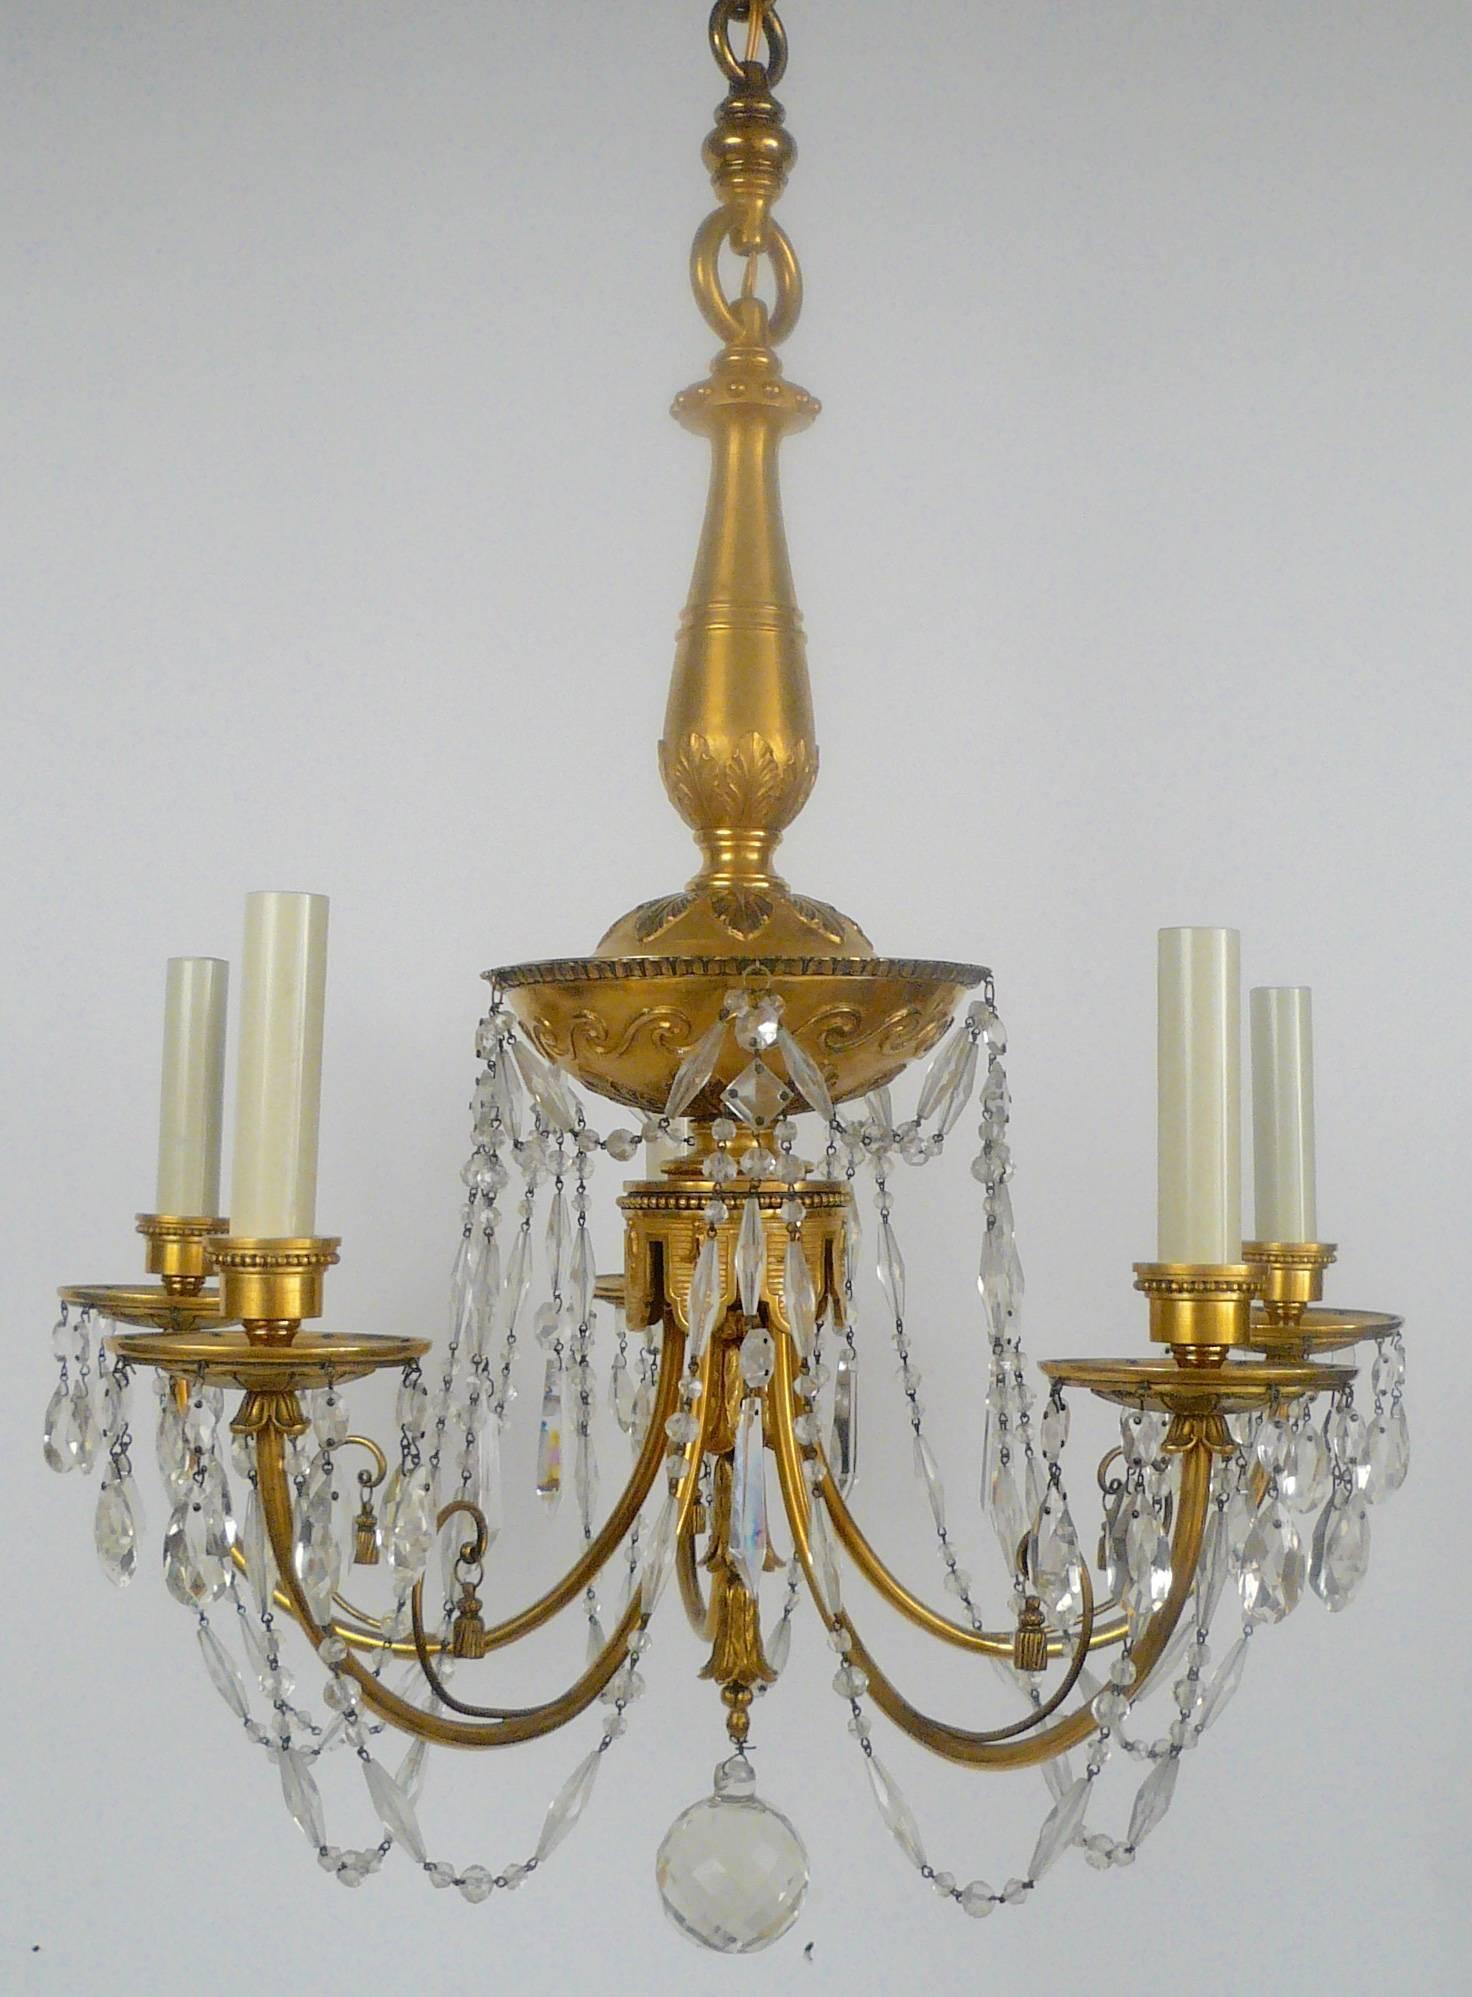 This five-light fixture by Caldwell has English neoclassical motifs, and retains it's original gilt bronze finish.